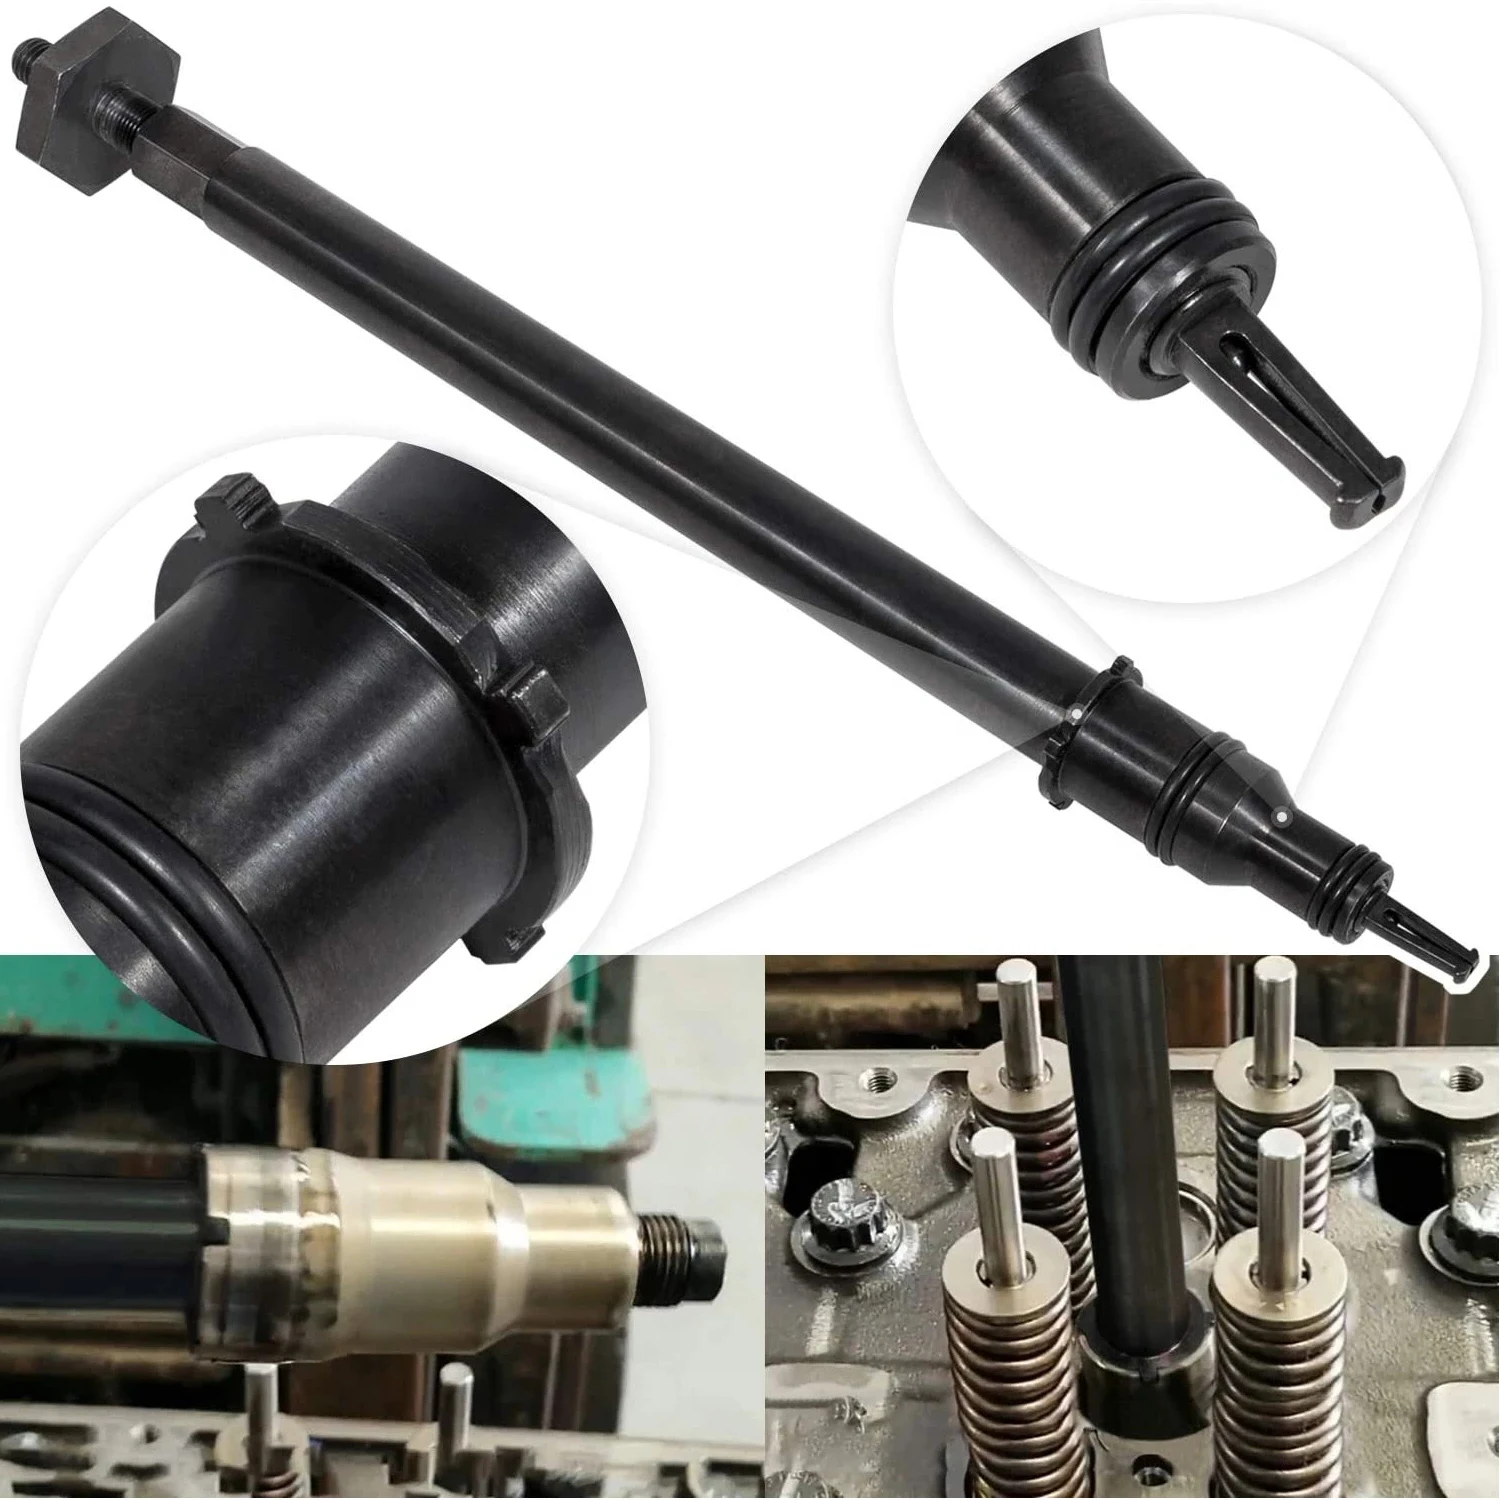 

Injector Cup Nozzle Tube Remover and Installer Tool Alternative to J-47388-A W470589000700 for Detroit Diesel DD13 DD15 DD16